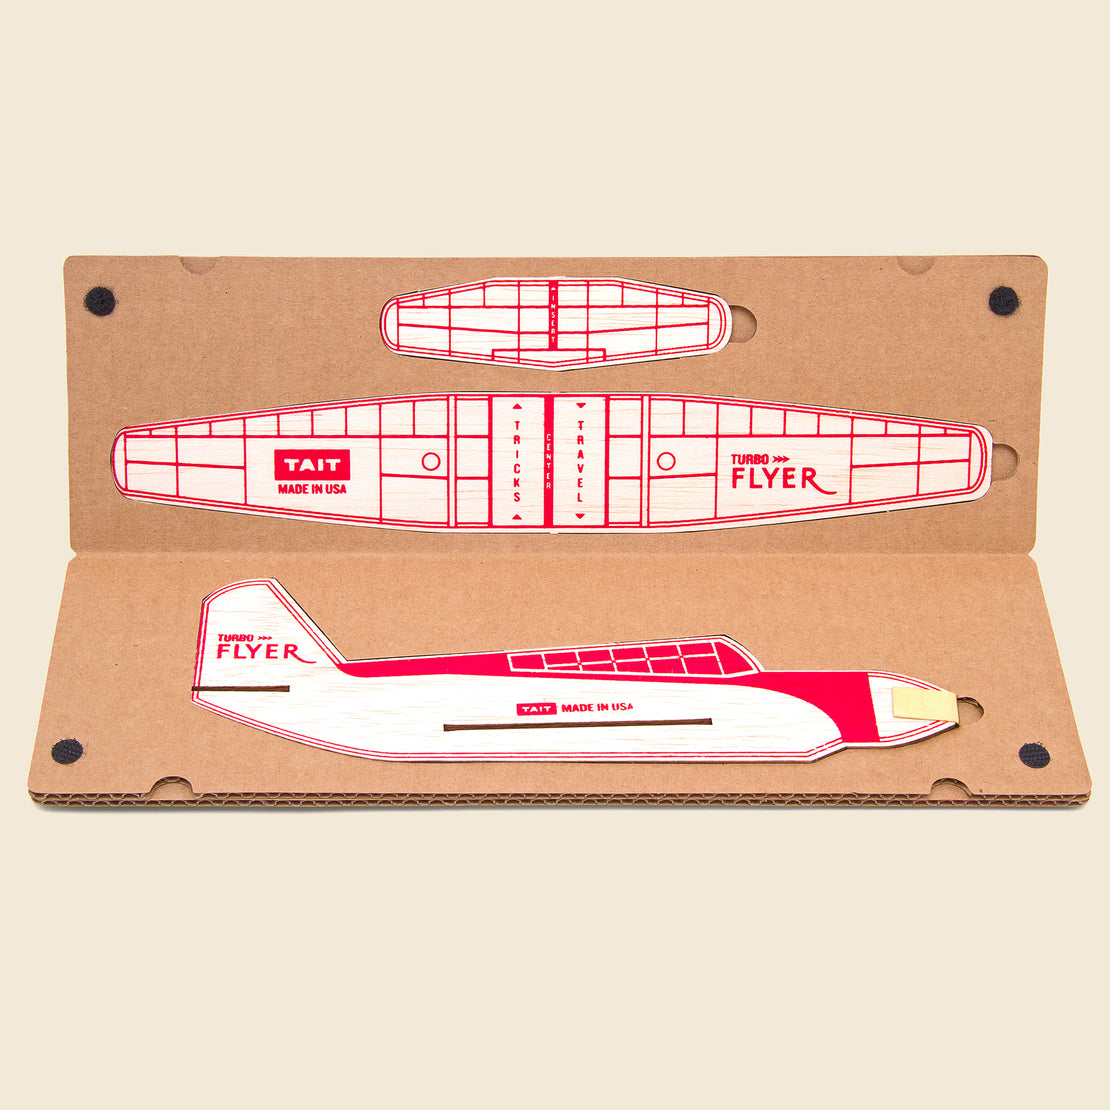 Turbo Flyer Balsa Airplane Kit - Red - Home - STAG Provisions - Gift - Miscellaneous